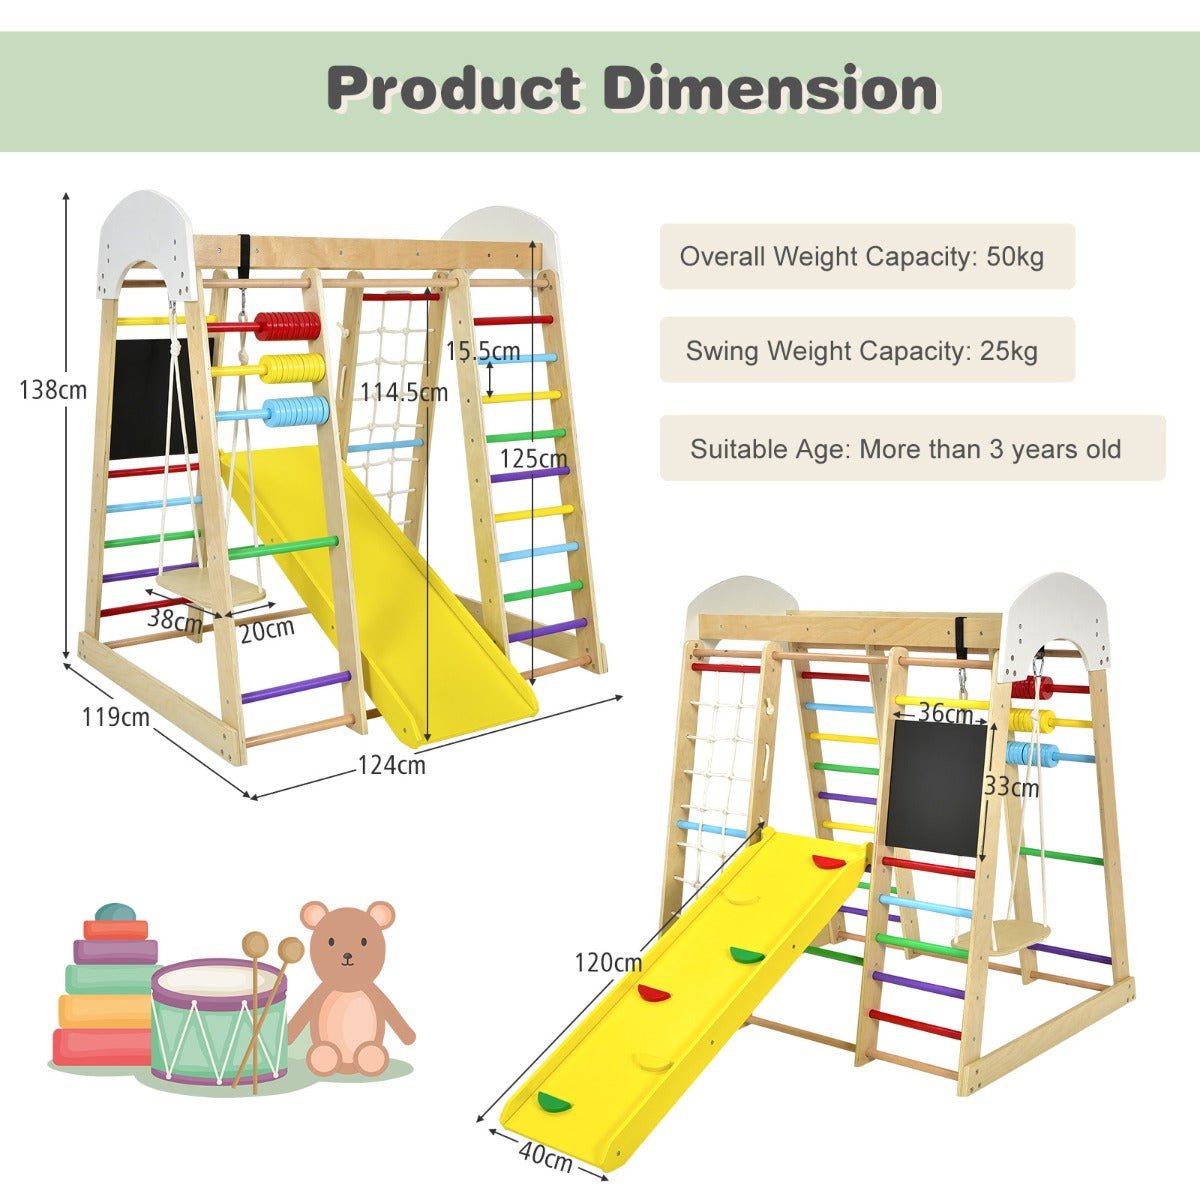 Get Active with the 8-in-1 Wooden Climbing Playset - Shop Now!